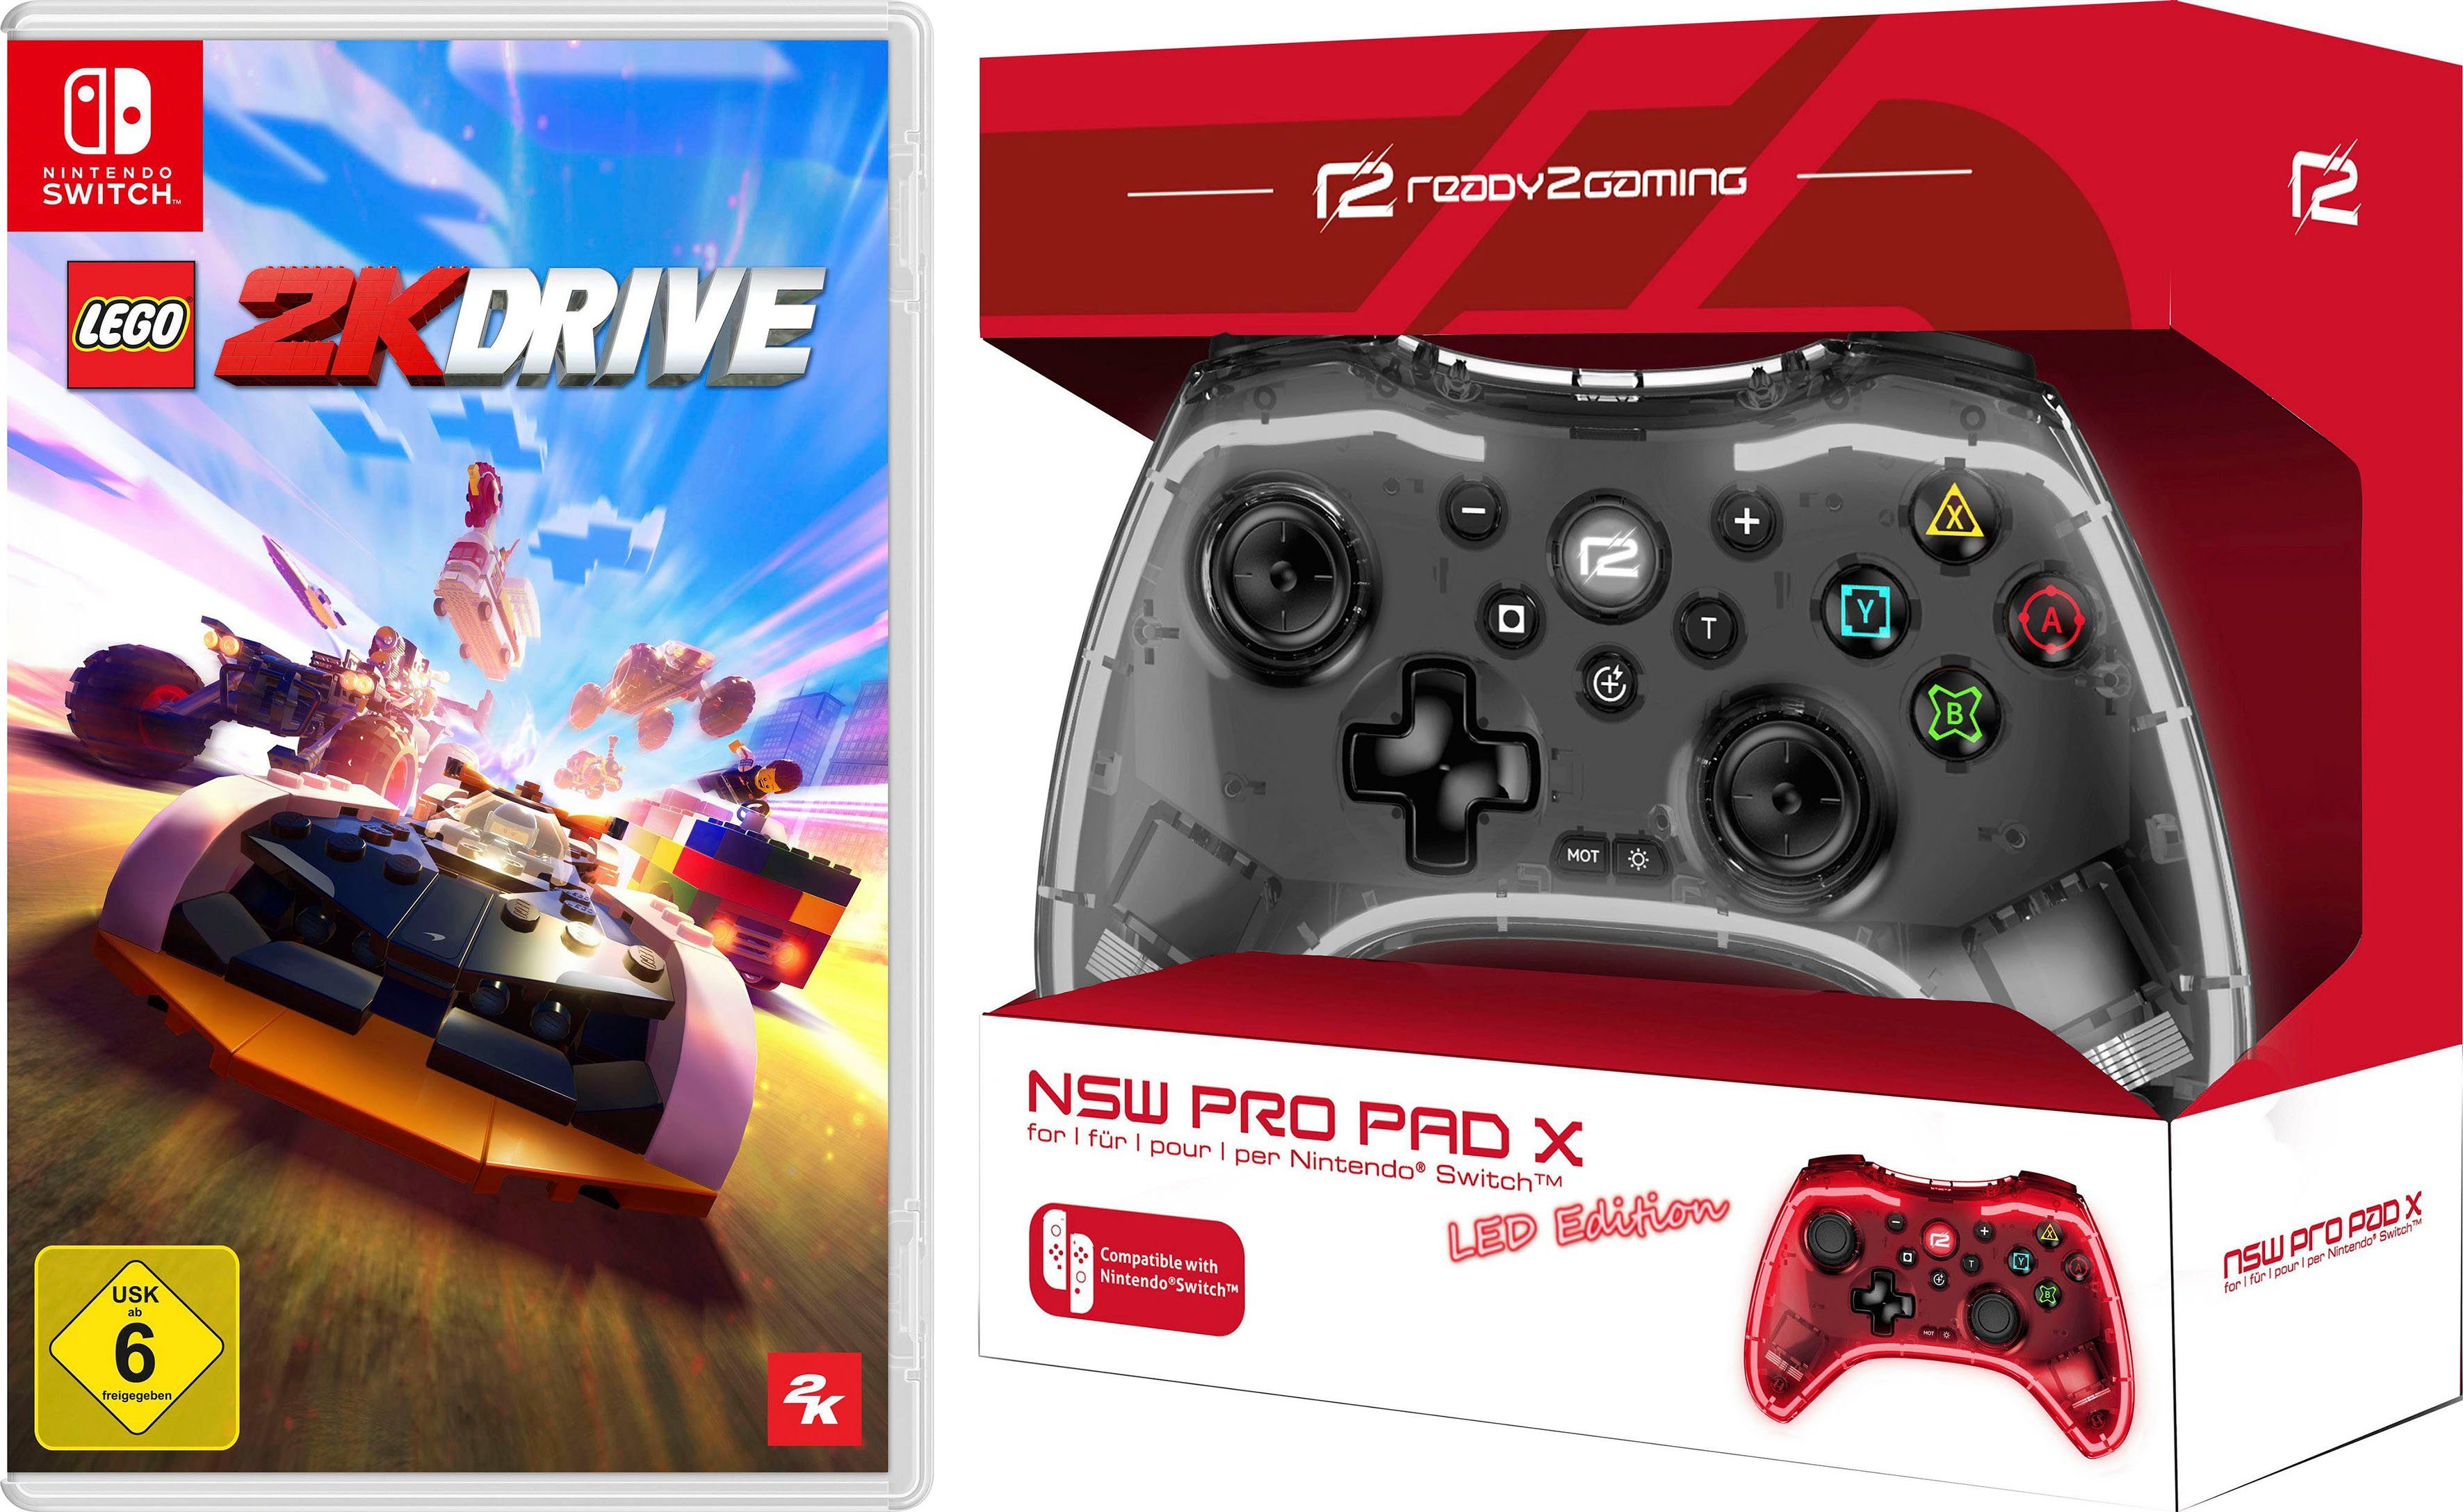 Ready2gaming Gamepad + NSW Lego 2K Drive (USK) - Code in the Box Controller | PS3-Controller